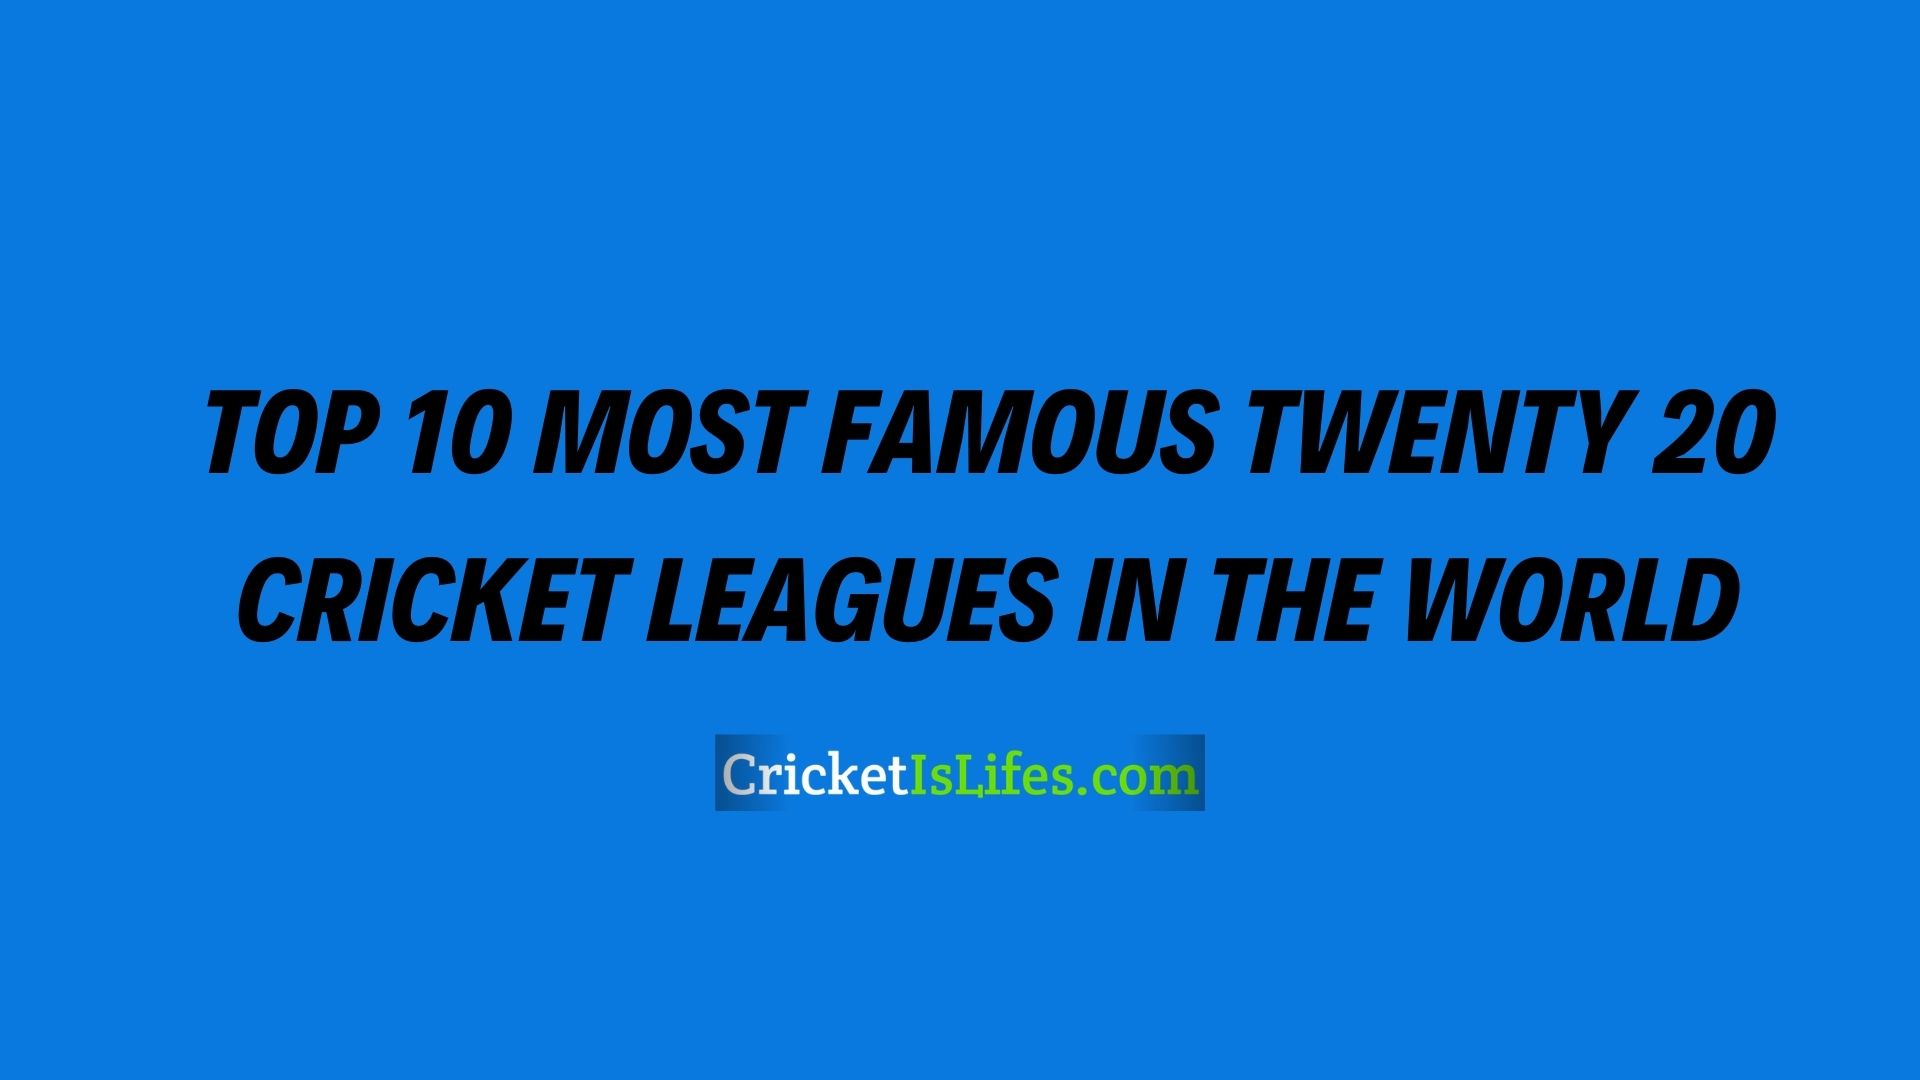 World’s Most Popular T20 Cricket Leagues